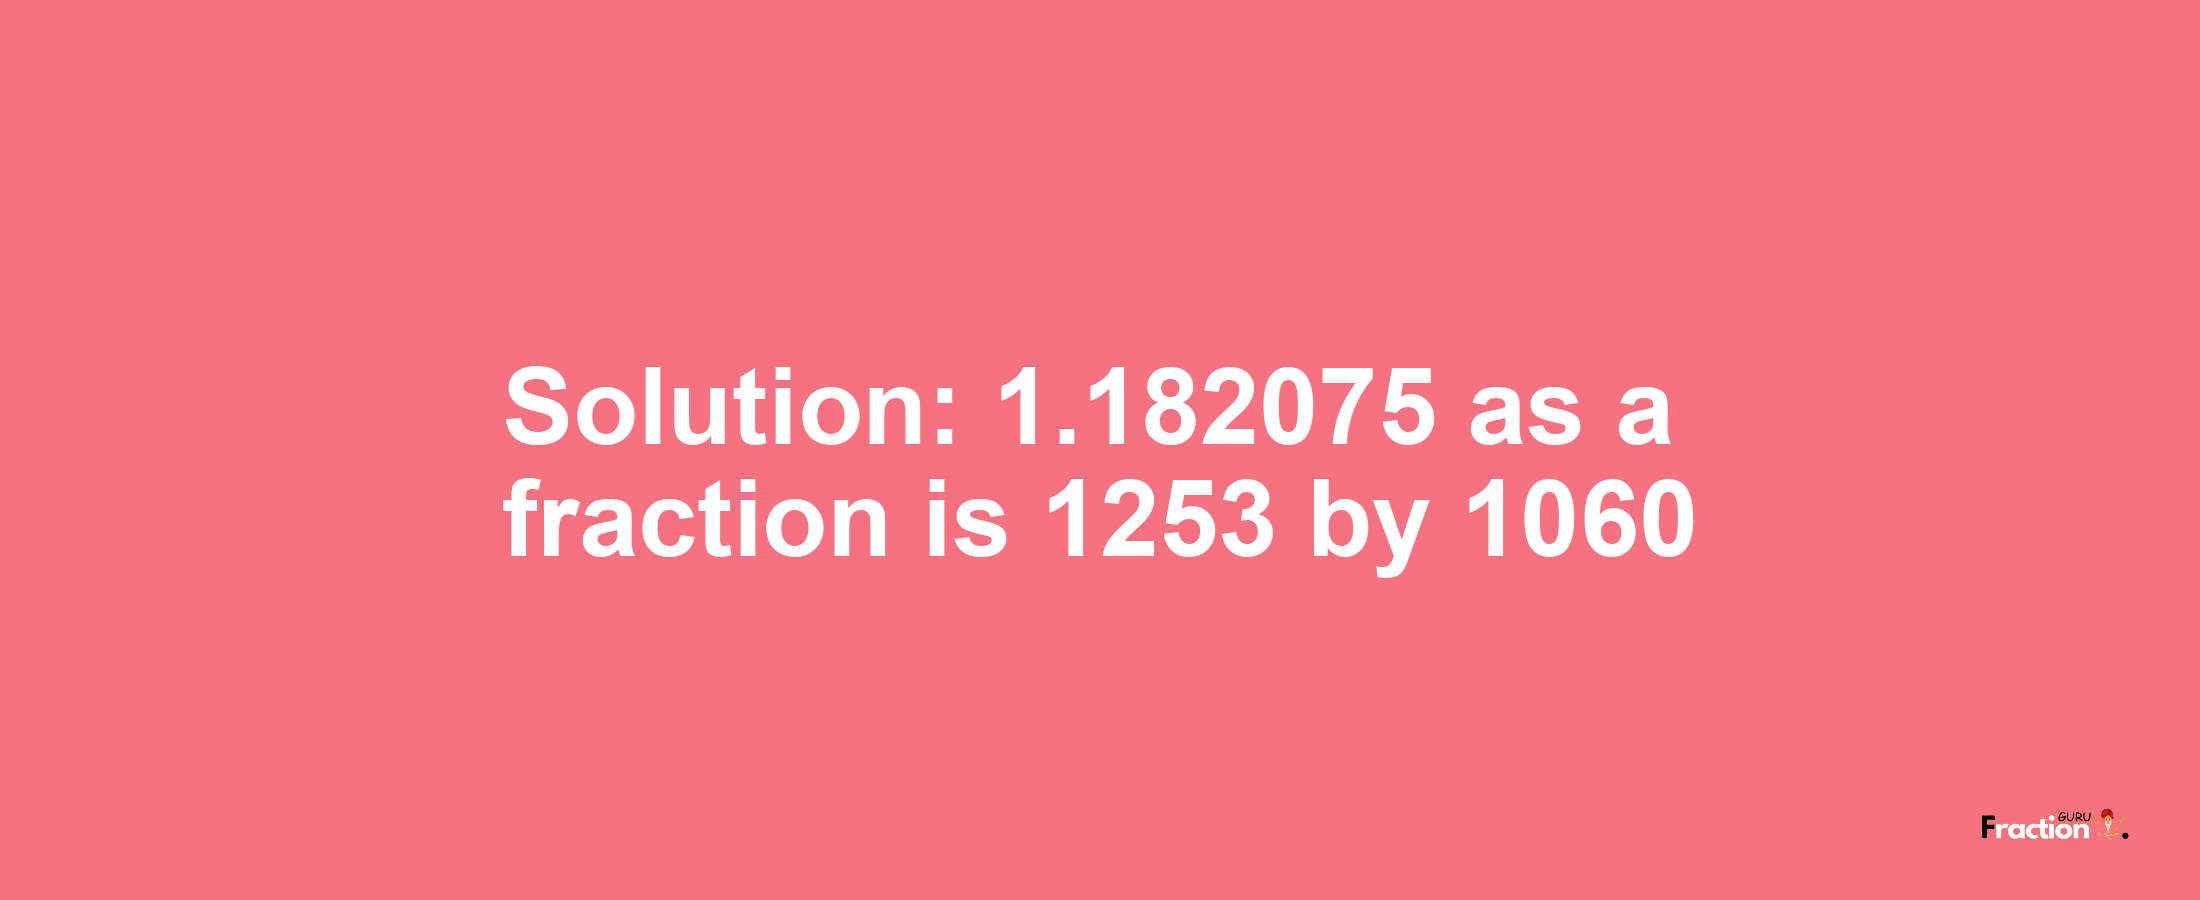 Solution:1.182075 as a fraction is 1253/1060